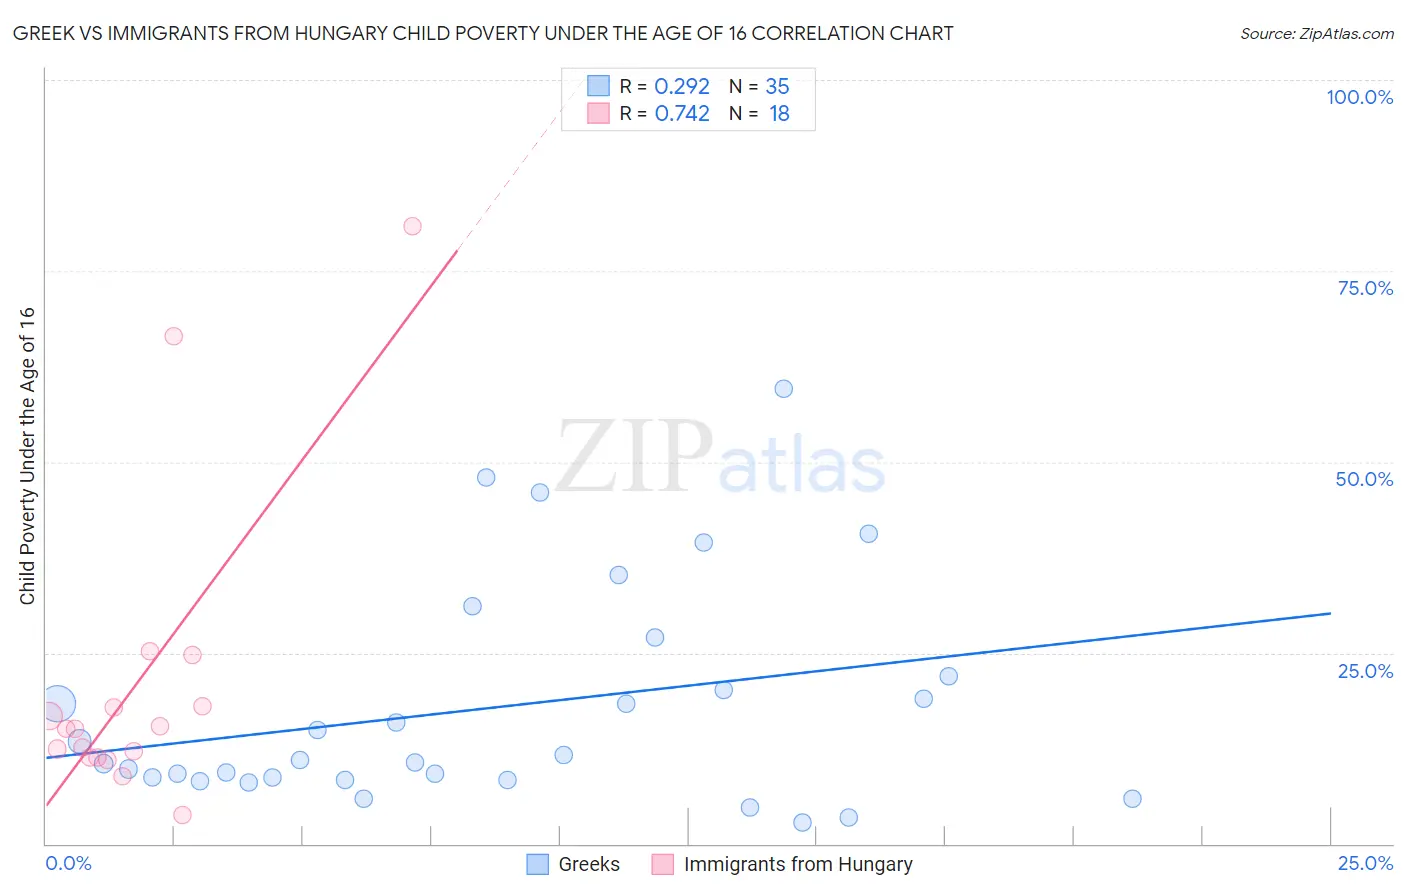 Greek vs Immigrants from Hungary Child Poverty Under the Age of 16